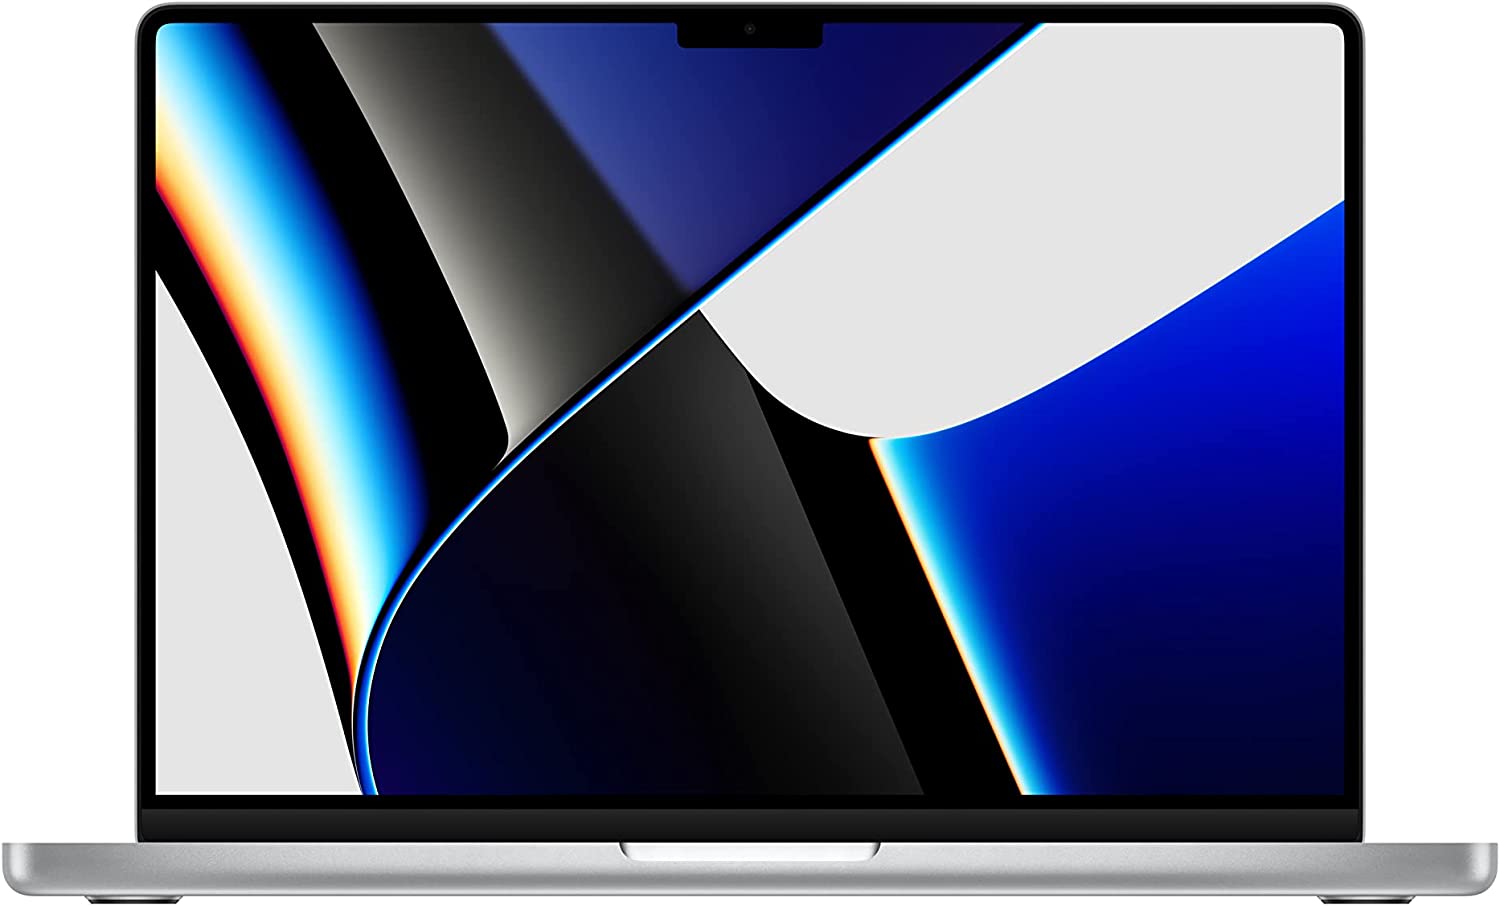 The latest MacBook Pro models look great from every angle